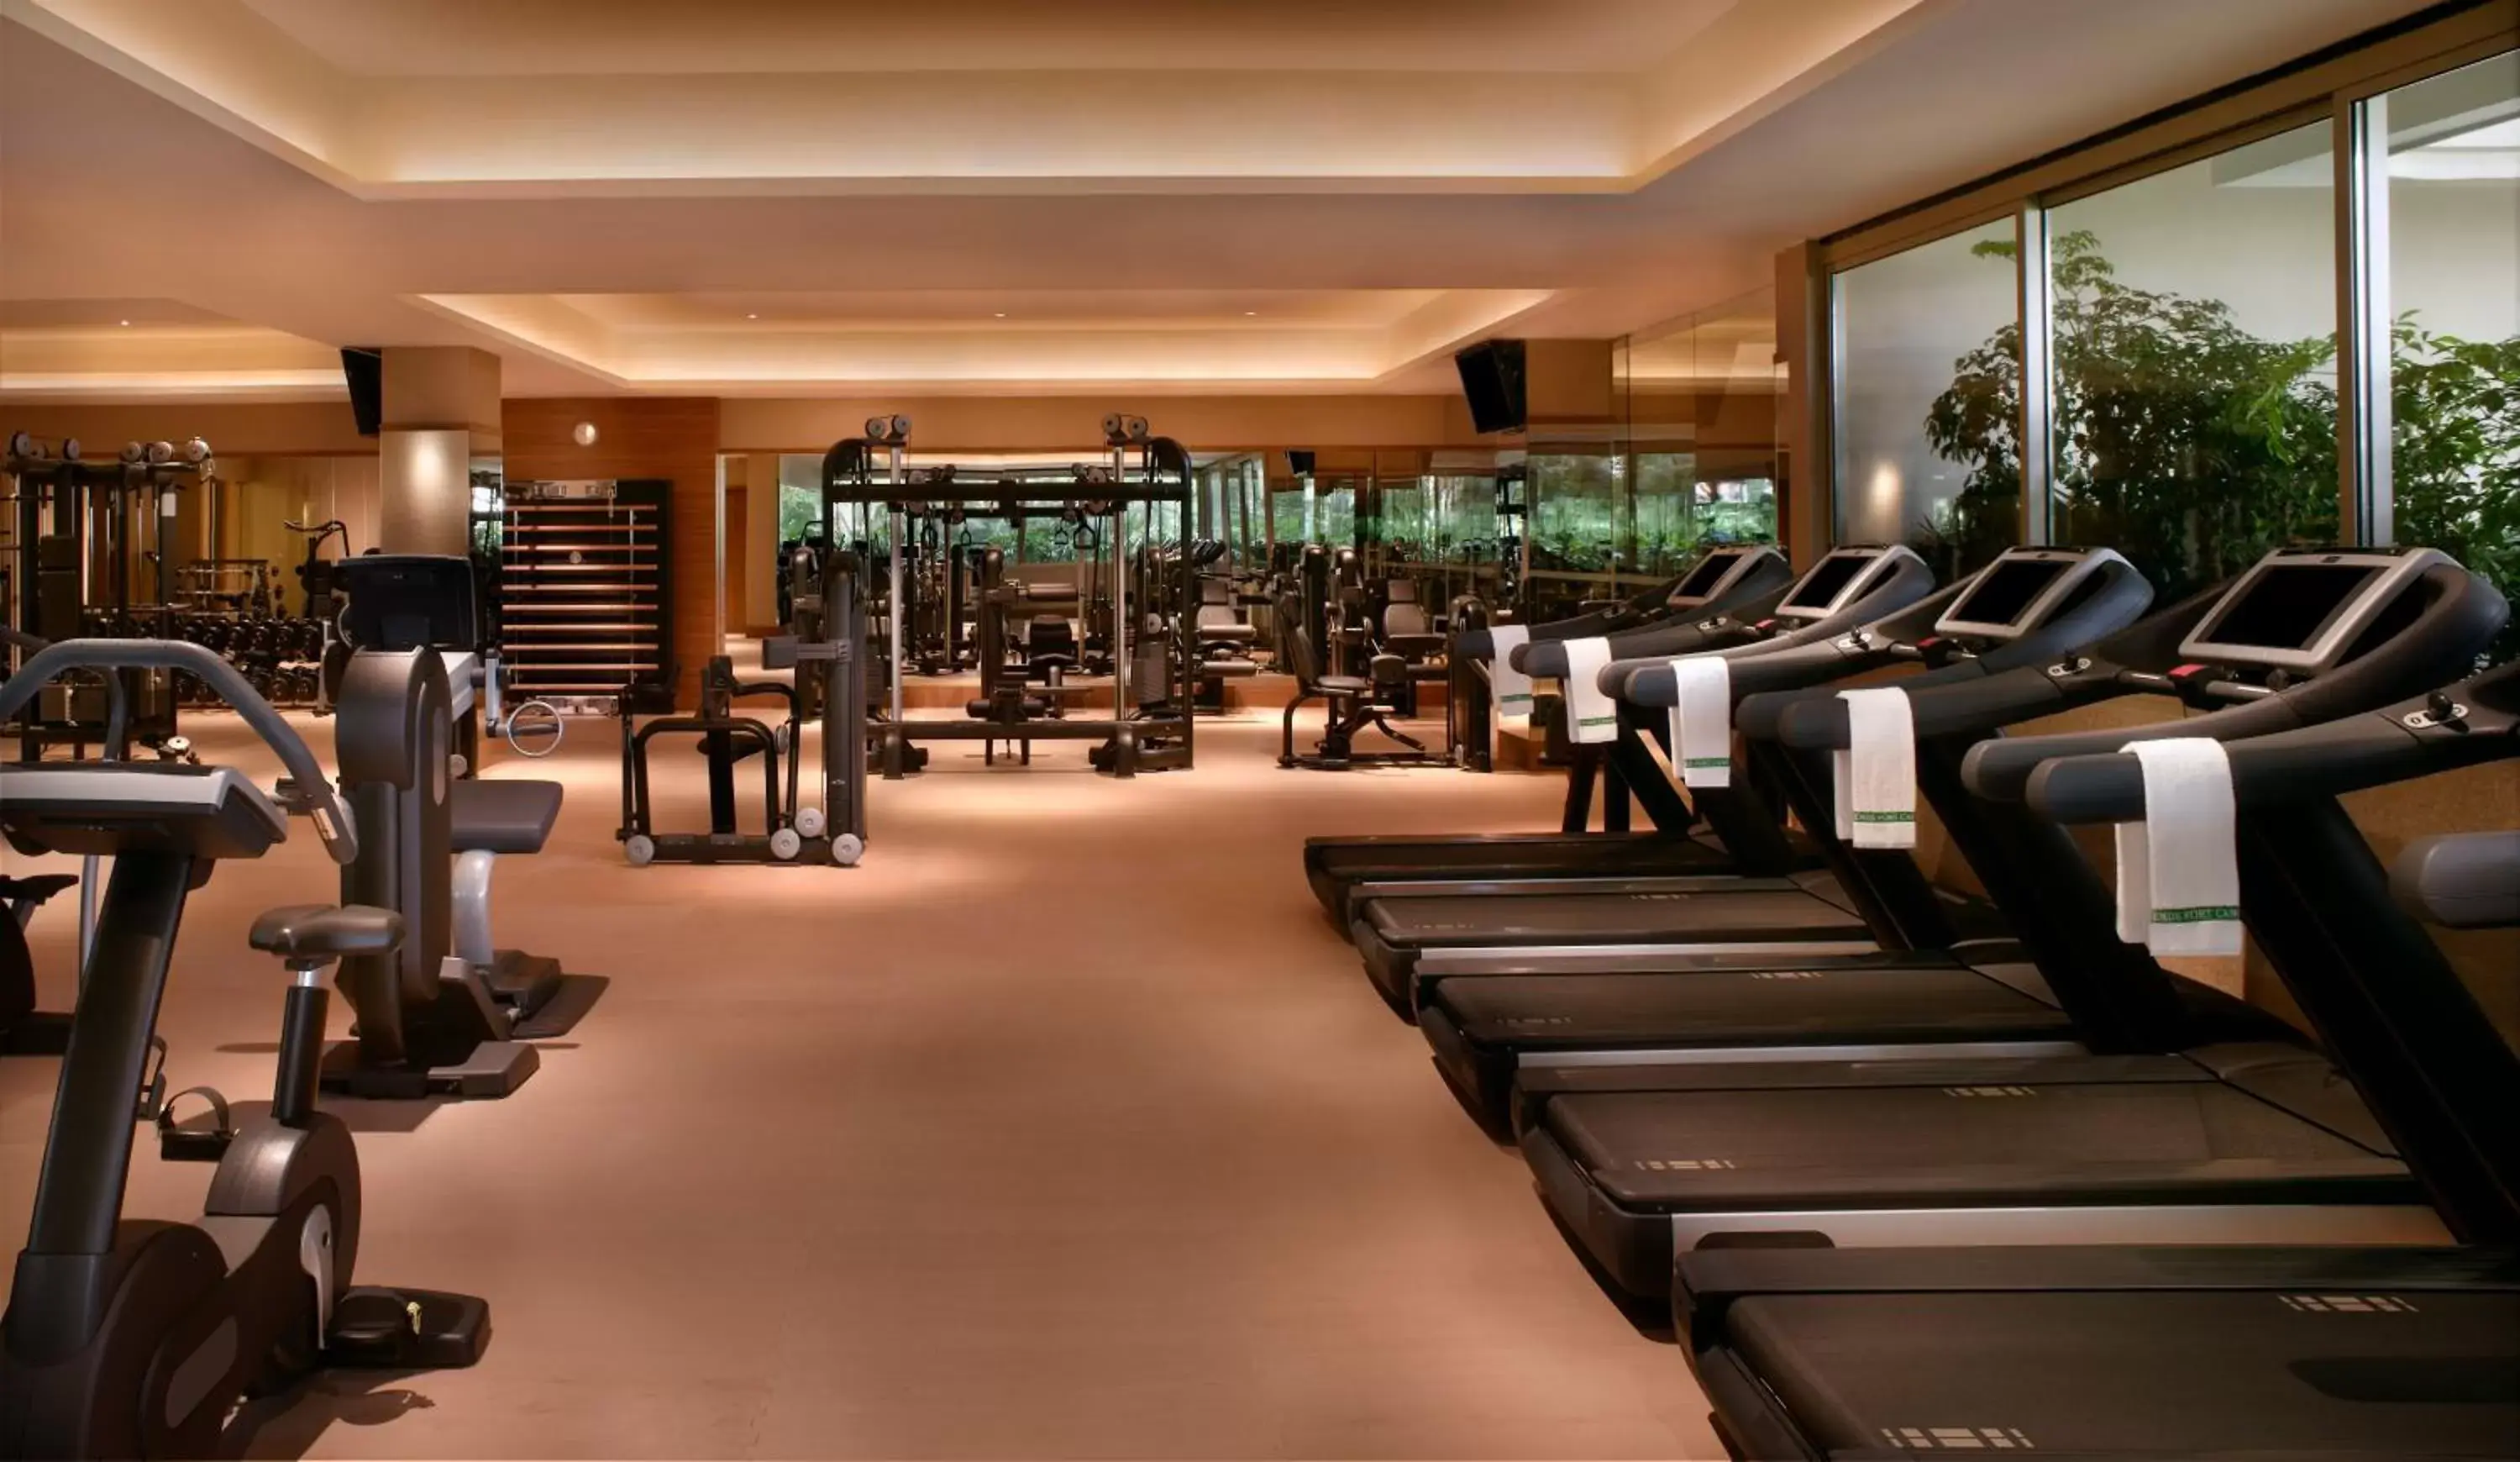 Fitness centre/facilities, Fitness Center/Facilities in Hotel Fort Canning